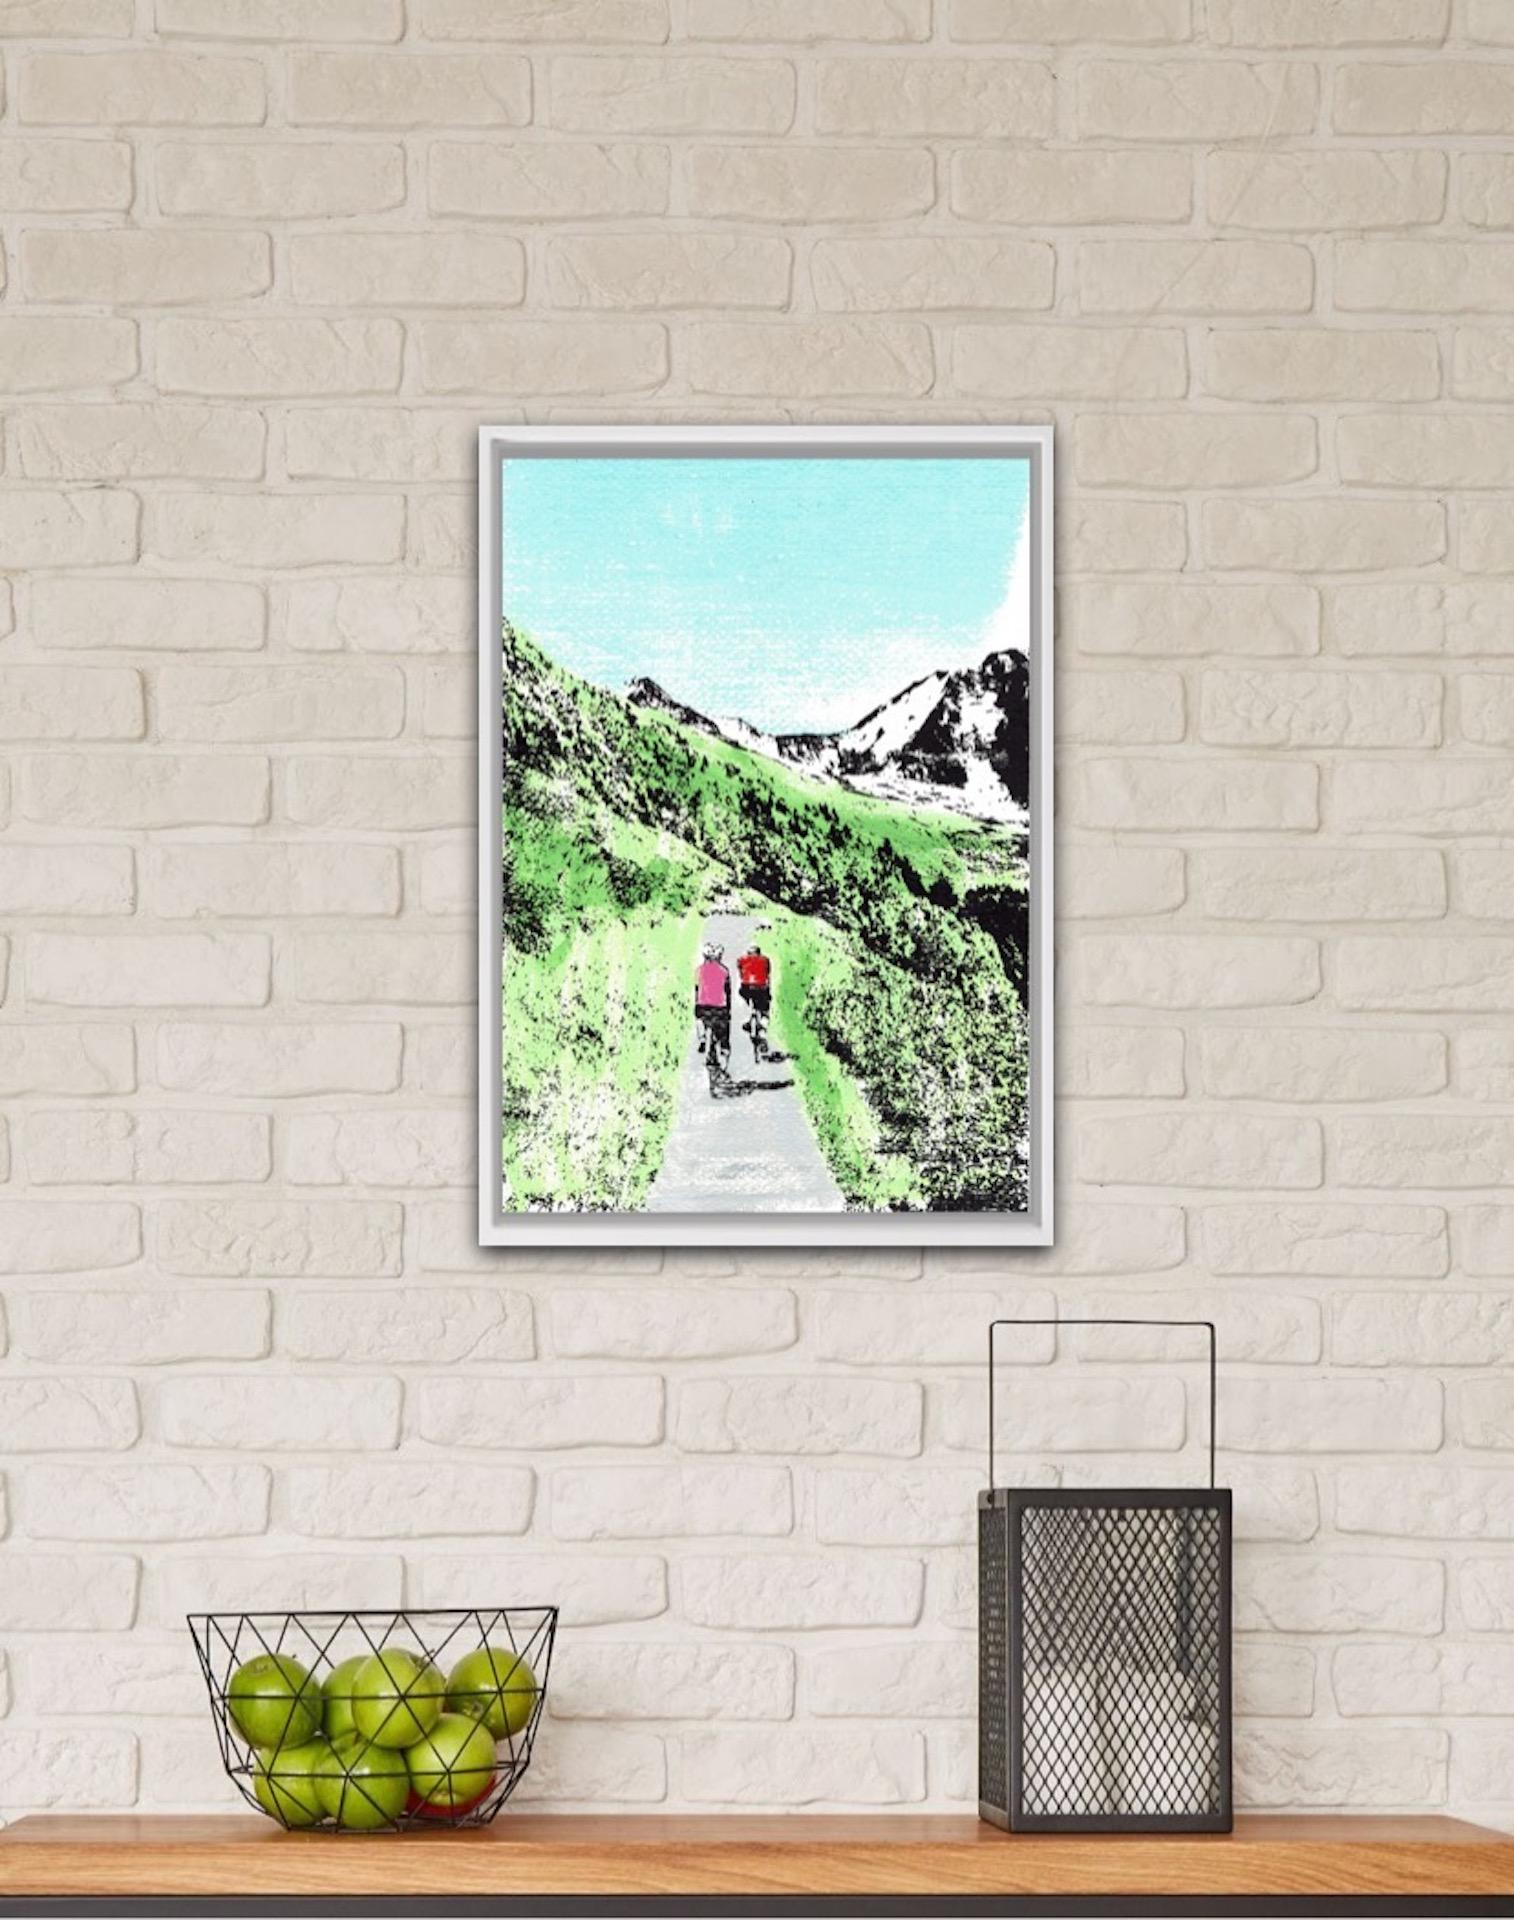 Katie Edwards
Exploring The Alpines
Limited Edition Silkscreen Print
Edition of 50
Size: H 40.5cm x W 30.5cm
Free Shipping
Please note that in situ images are purely an indication of how a piece may look.

‘Exploring the Alpines’ is a limited